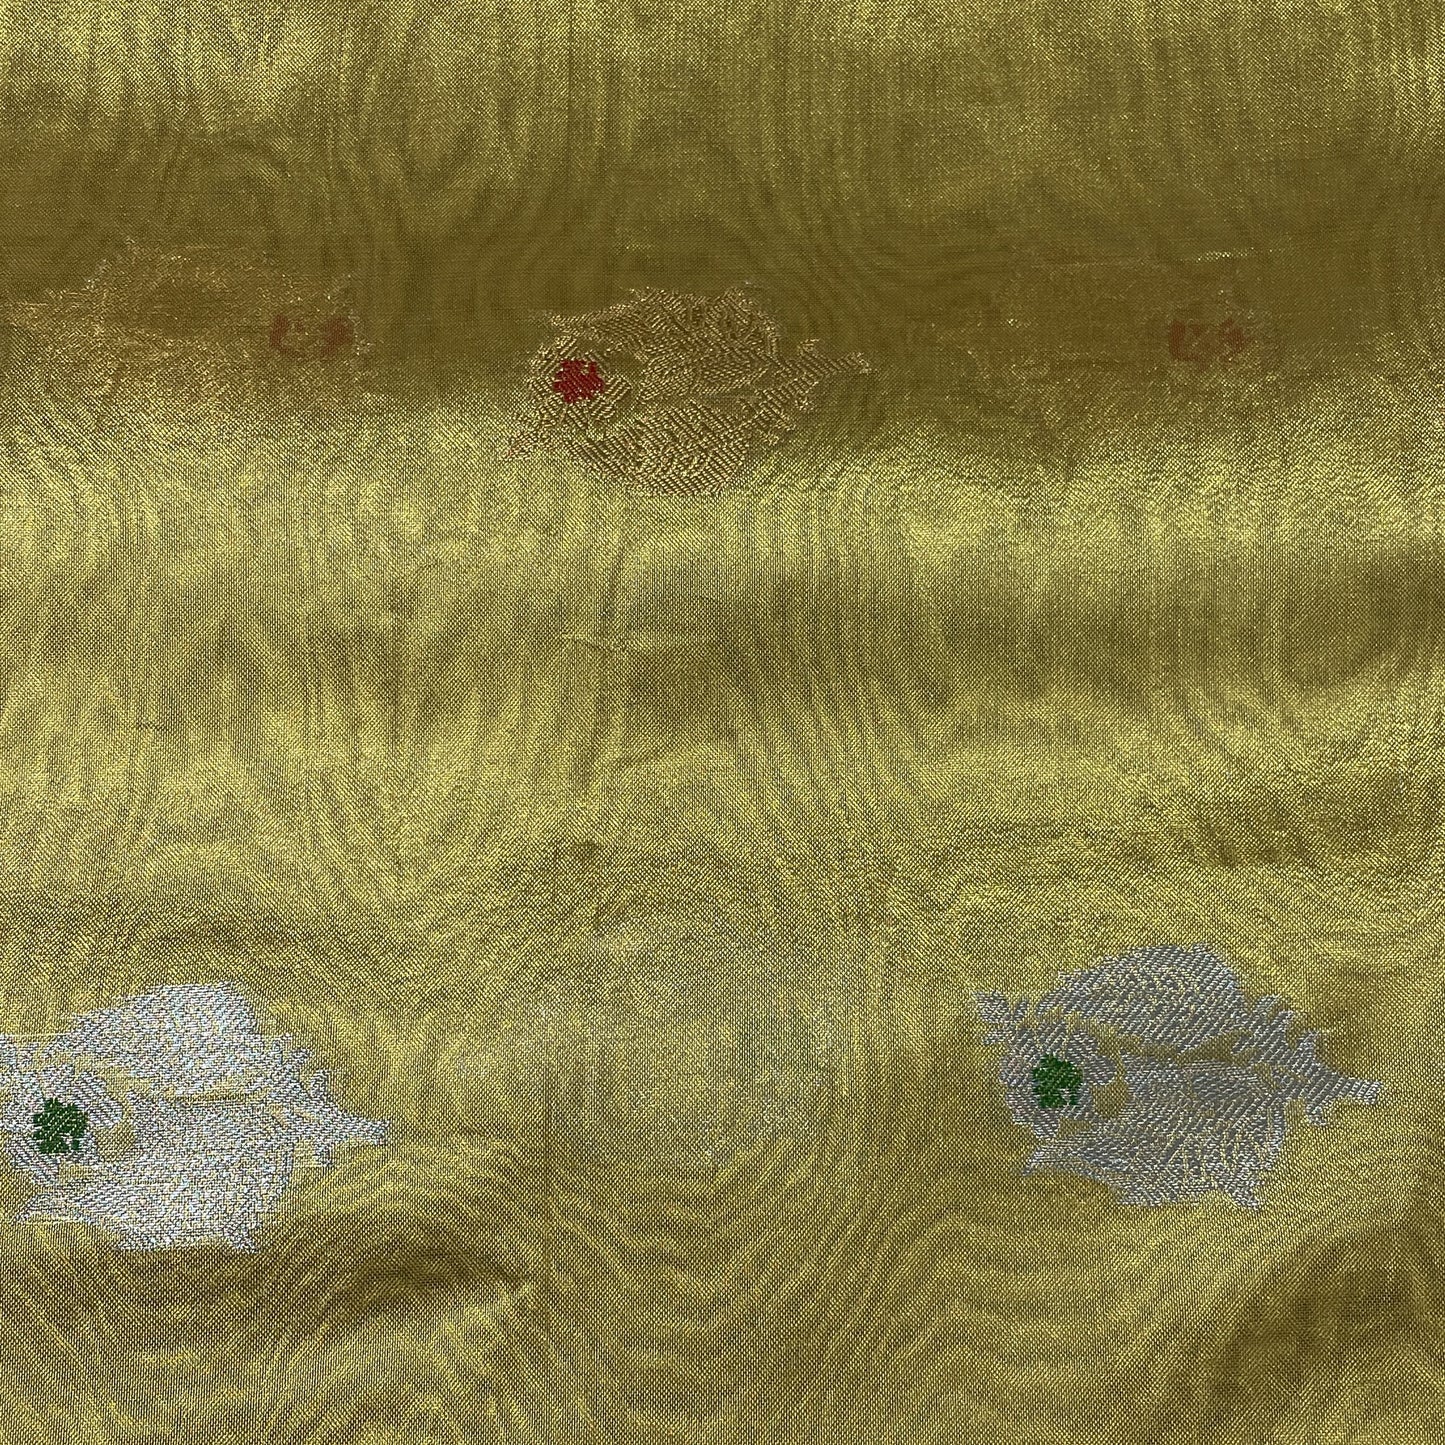 Classic Gold Floral Jacquard Tissue Fabric